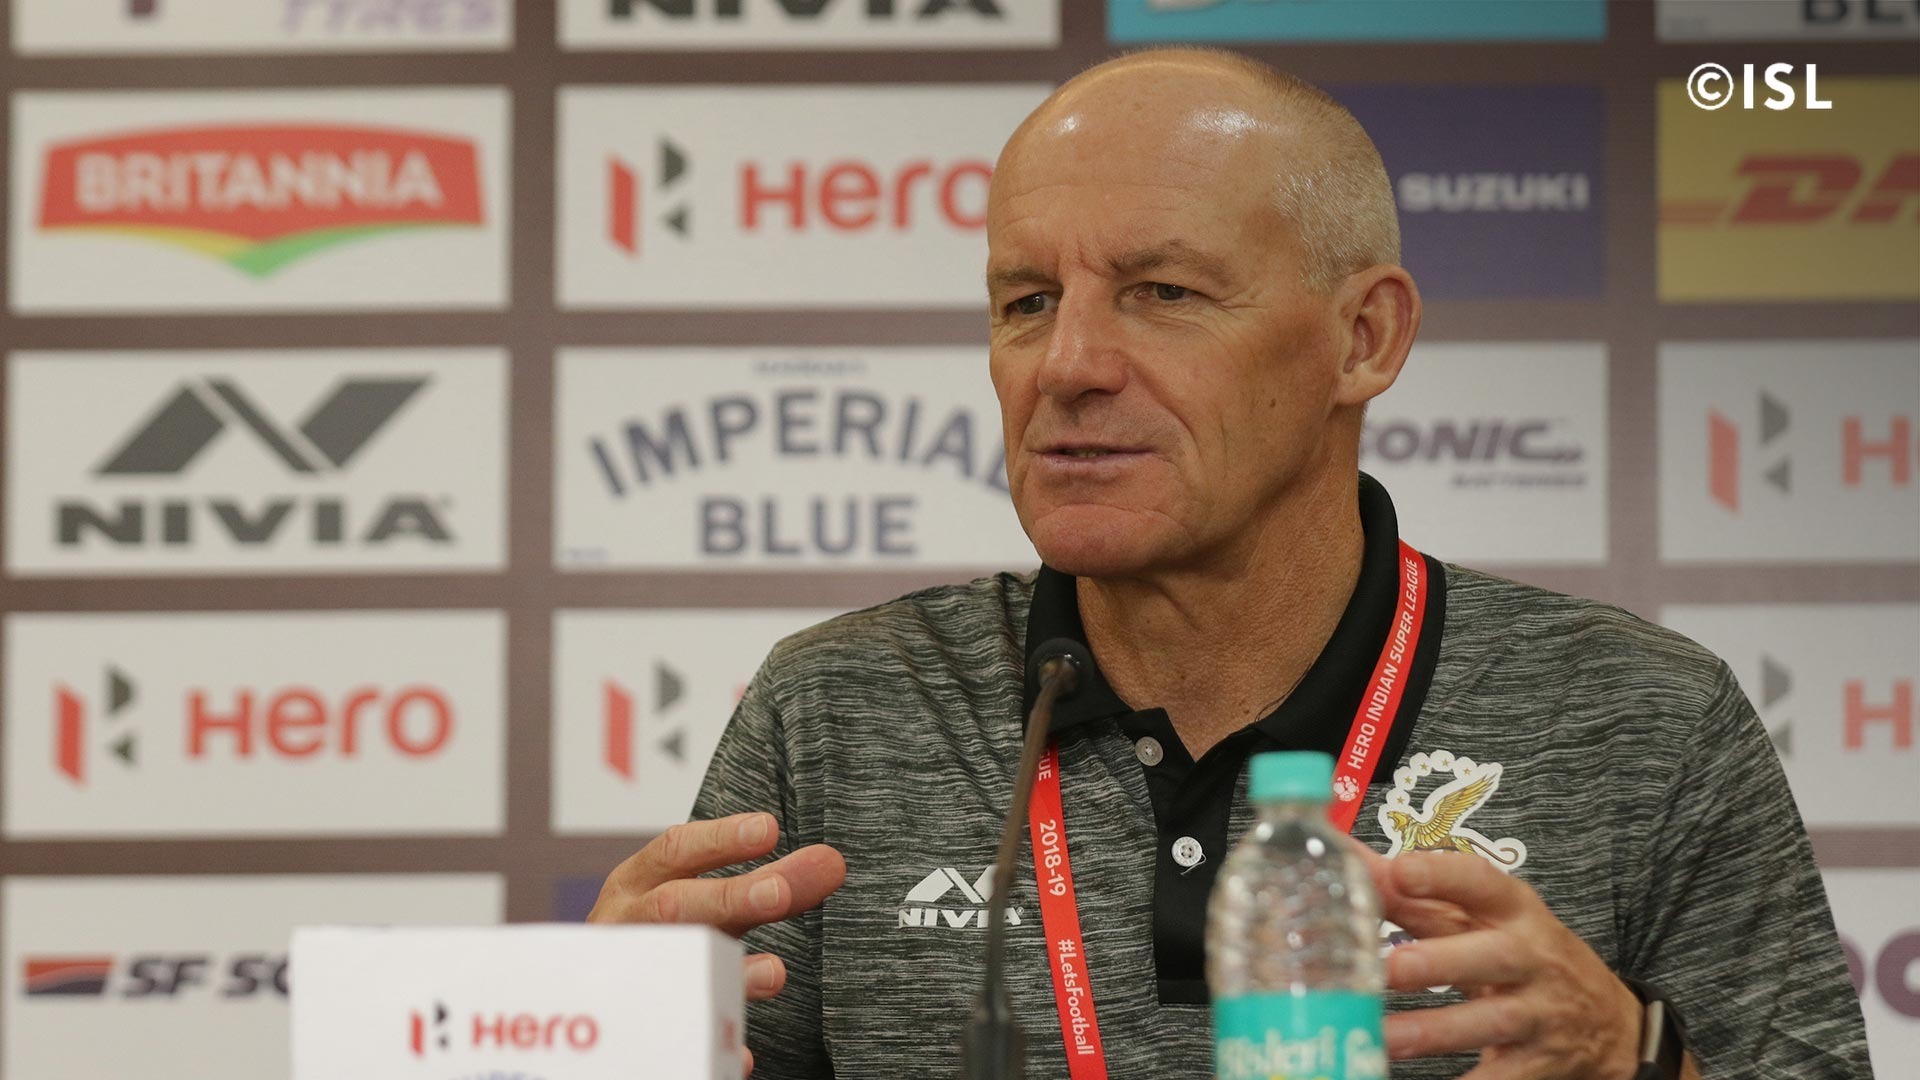 ISL | Steve Coppell and Shaun Ontong satisfied with stalemate in Guwahati